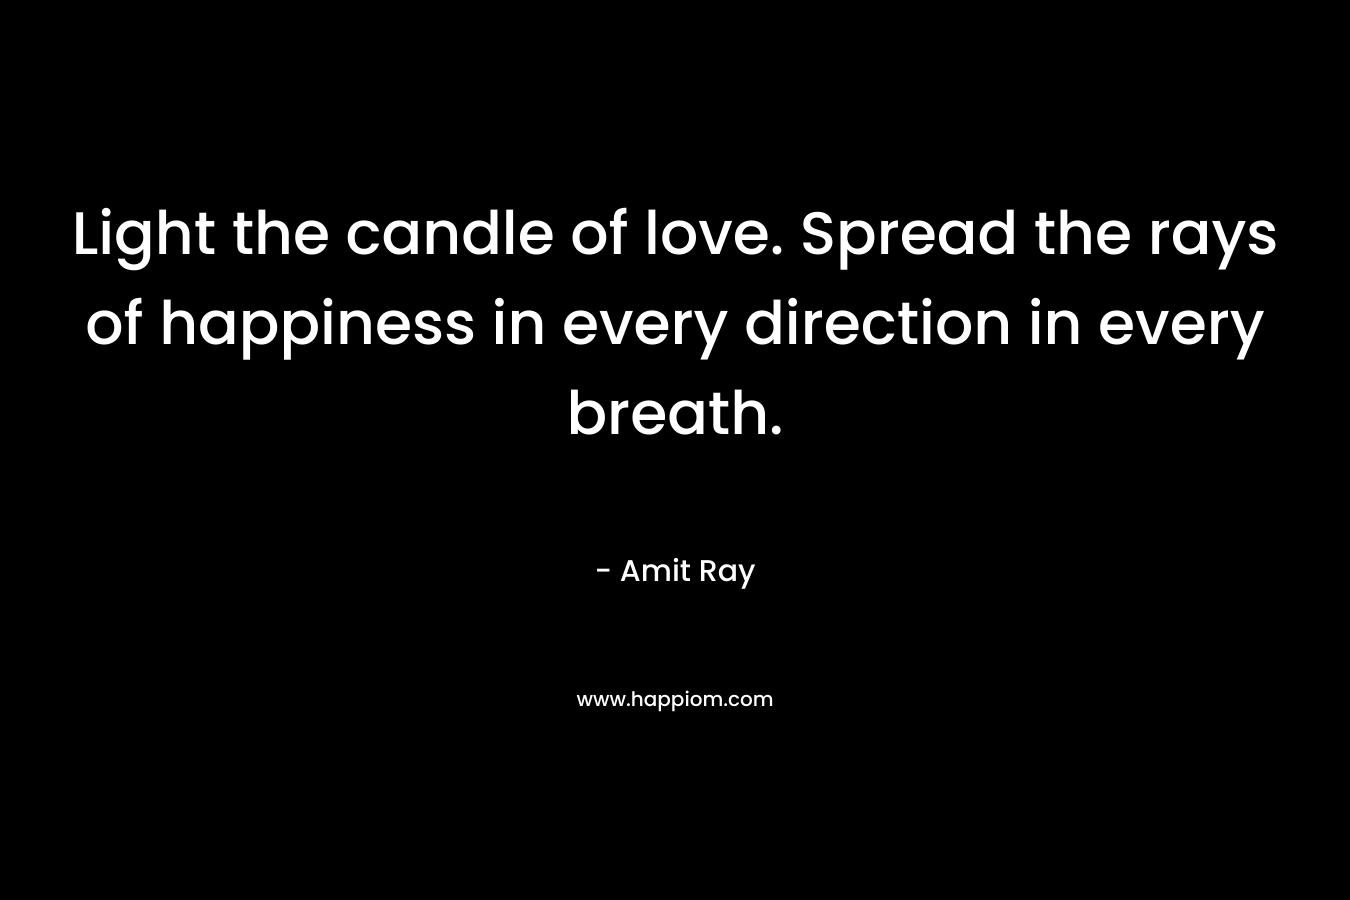 Light the candle of love. Spread the rays of happiness in every direction in every breath. – Amit Ray